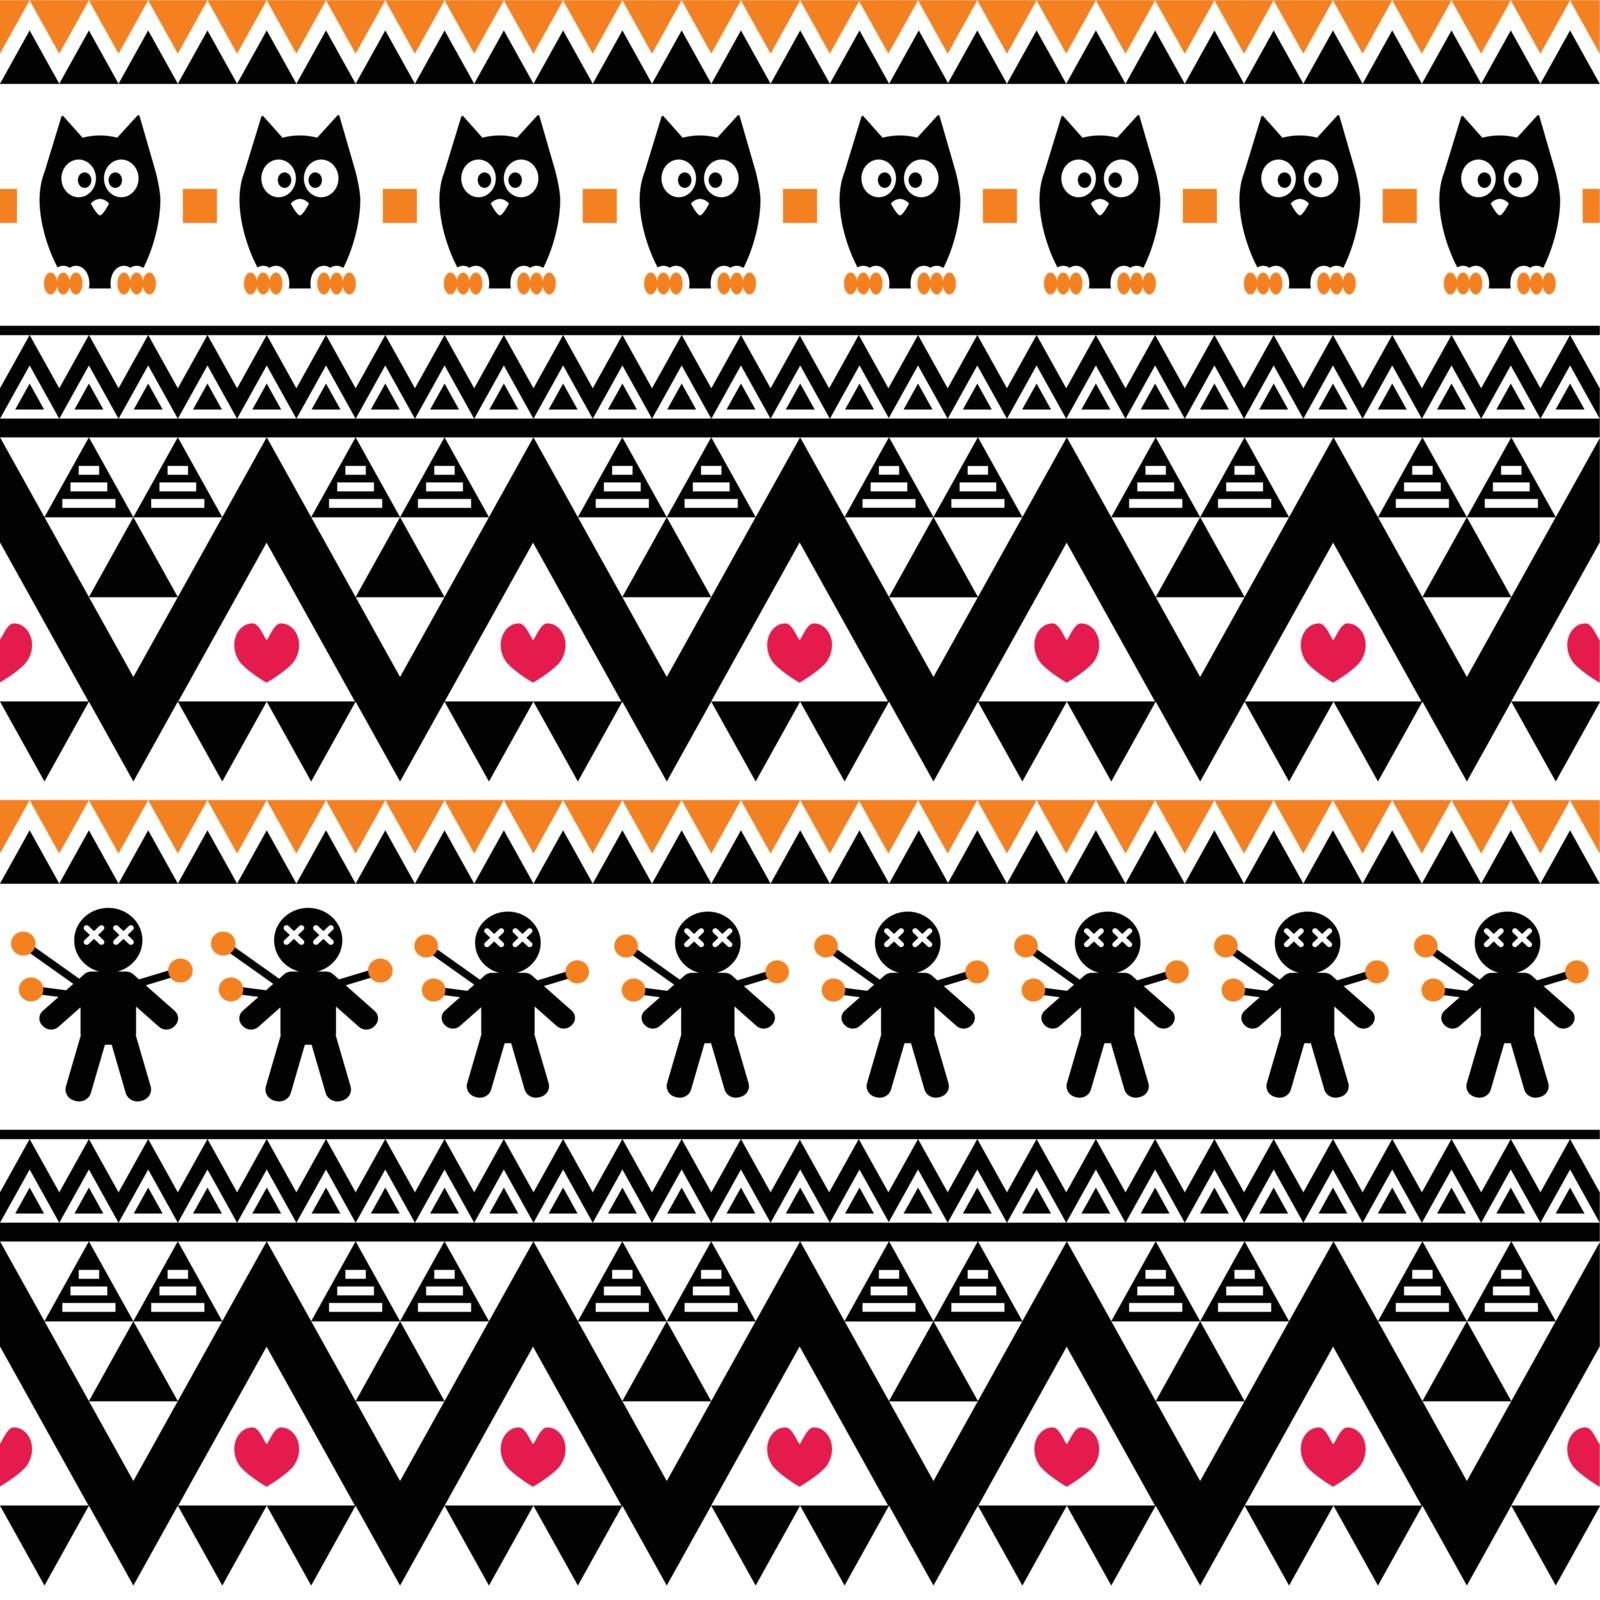 Black and orange repetitive pattern for Halloween on white background